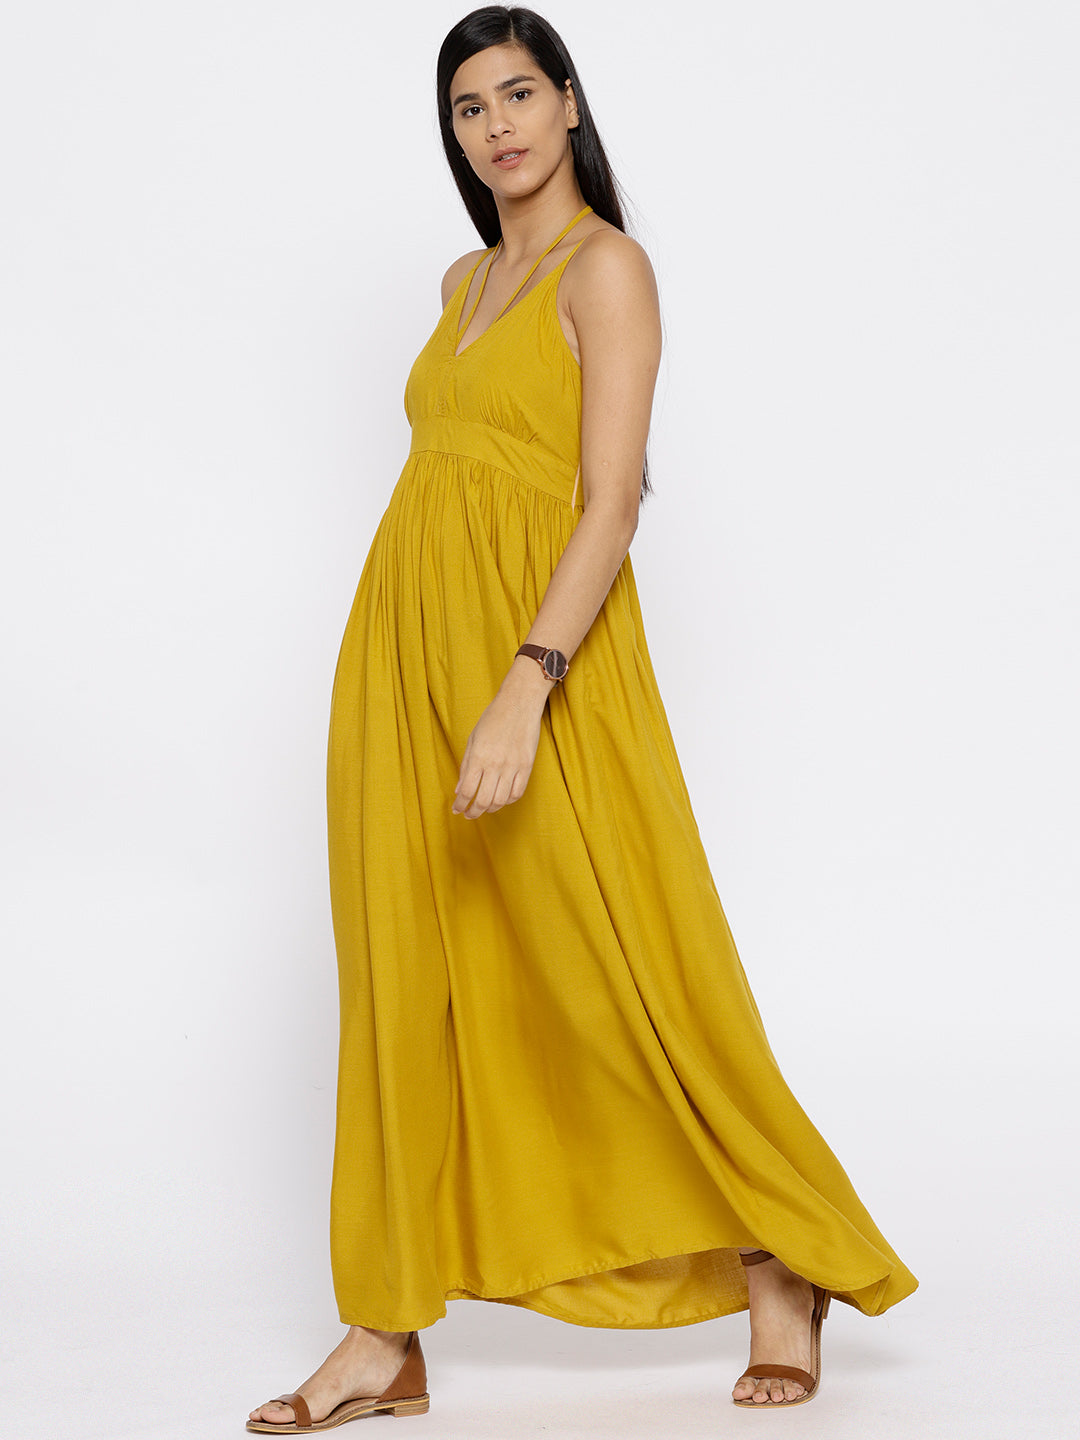 Long maxi dress with halter tie up